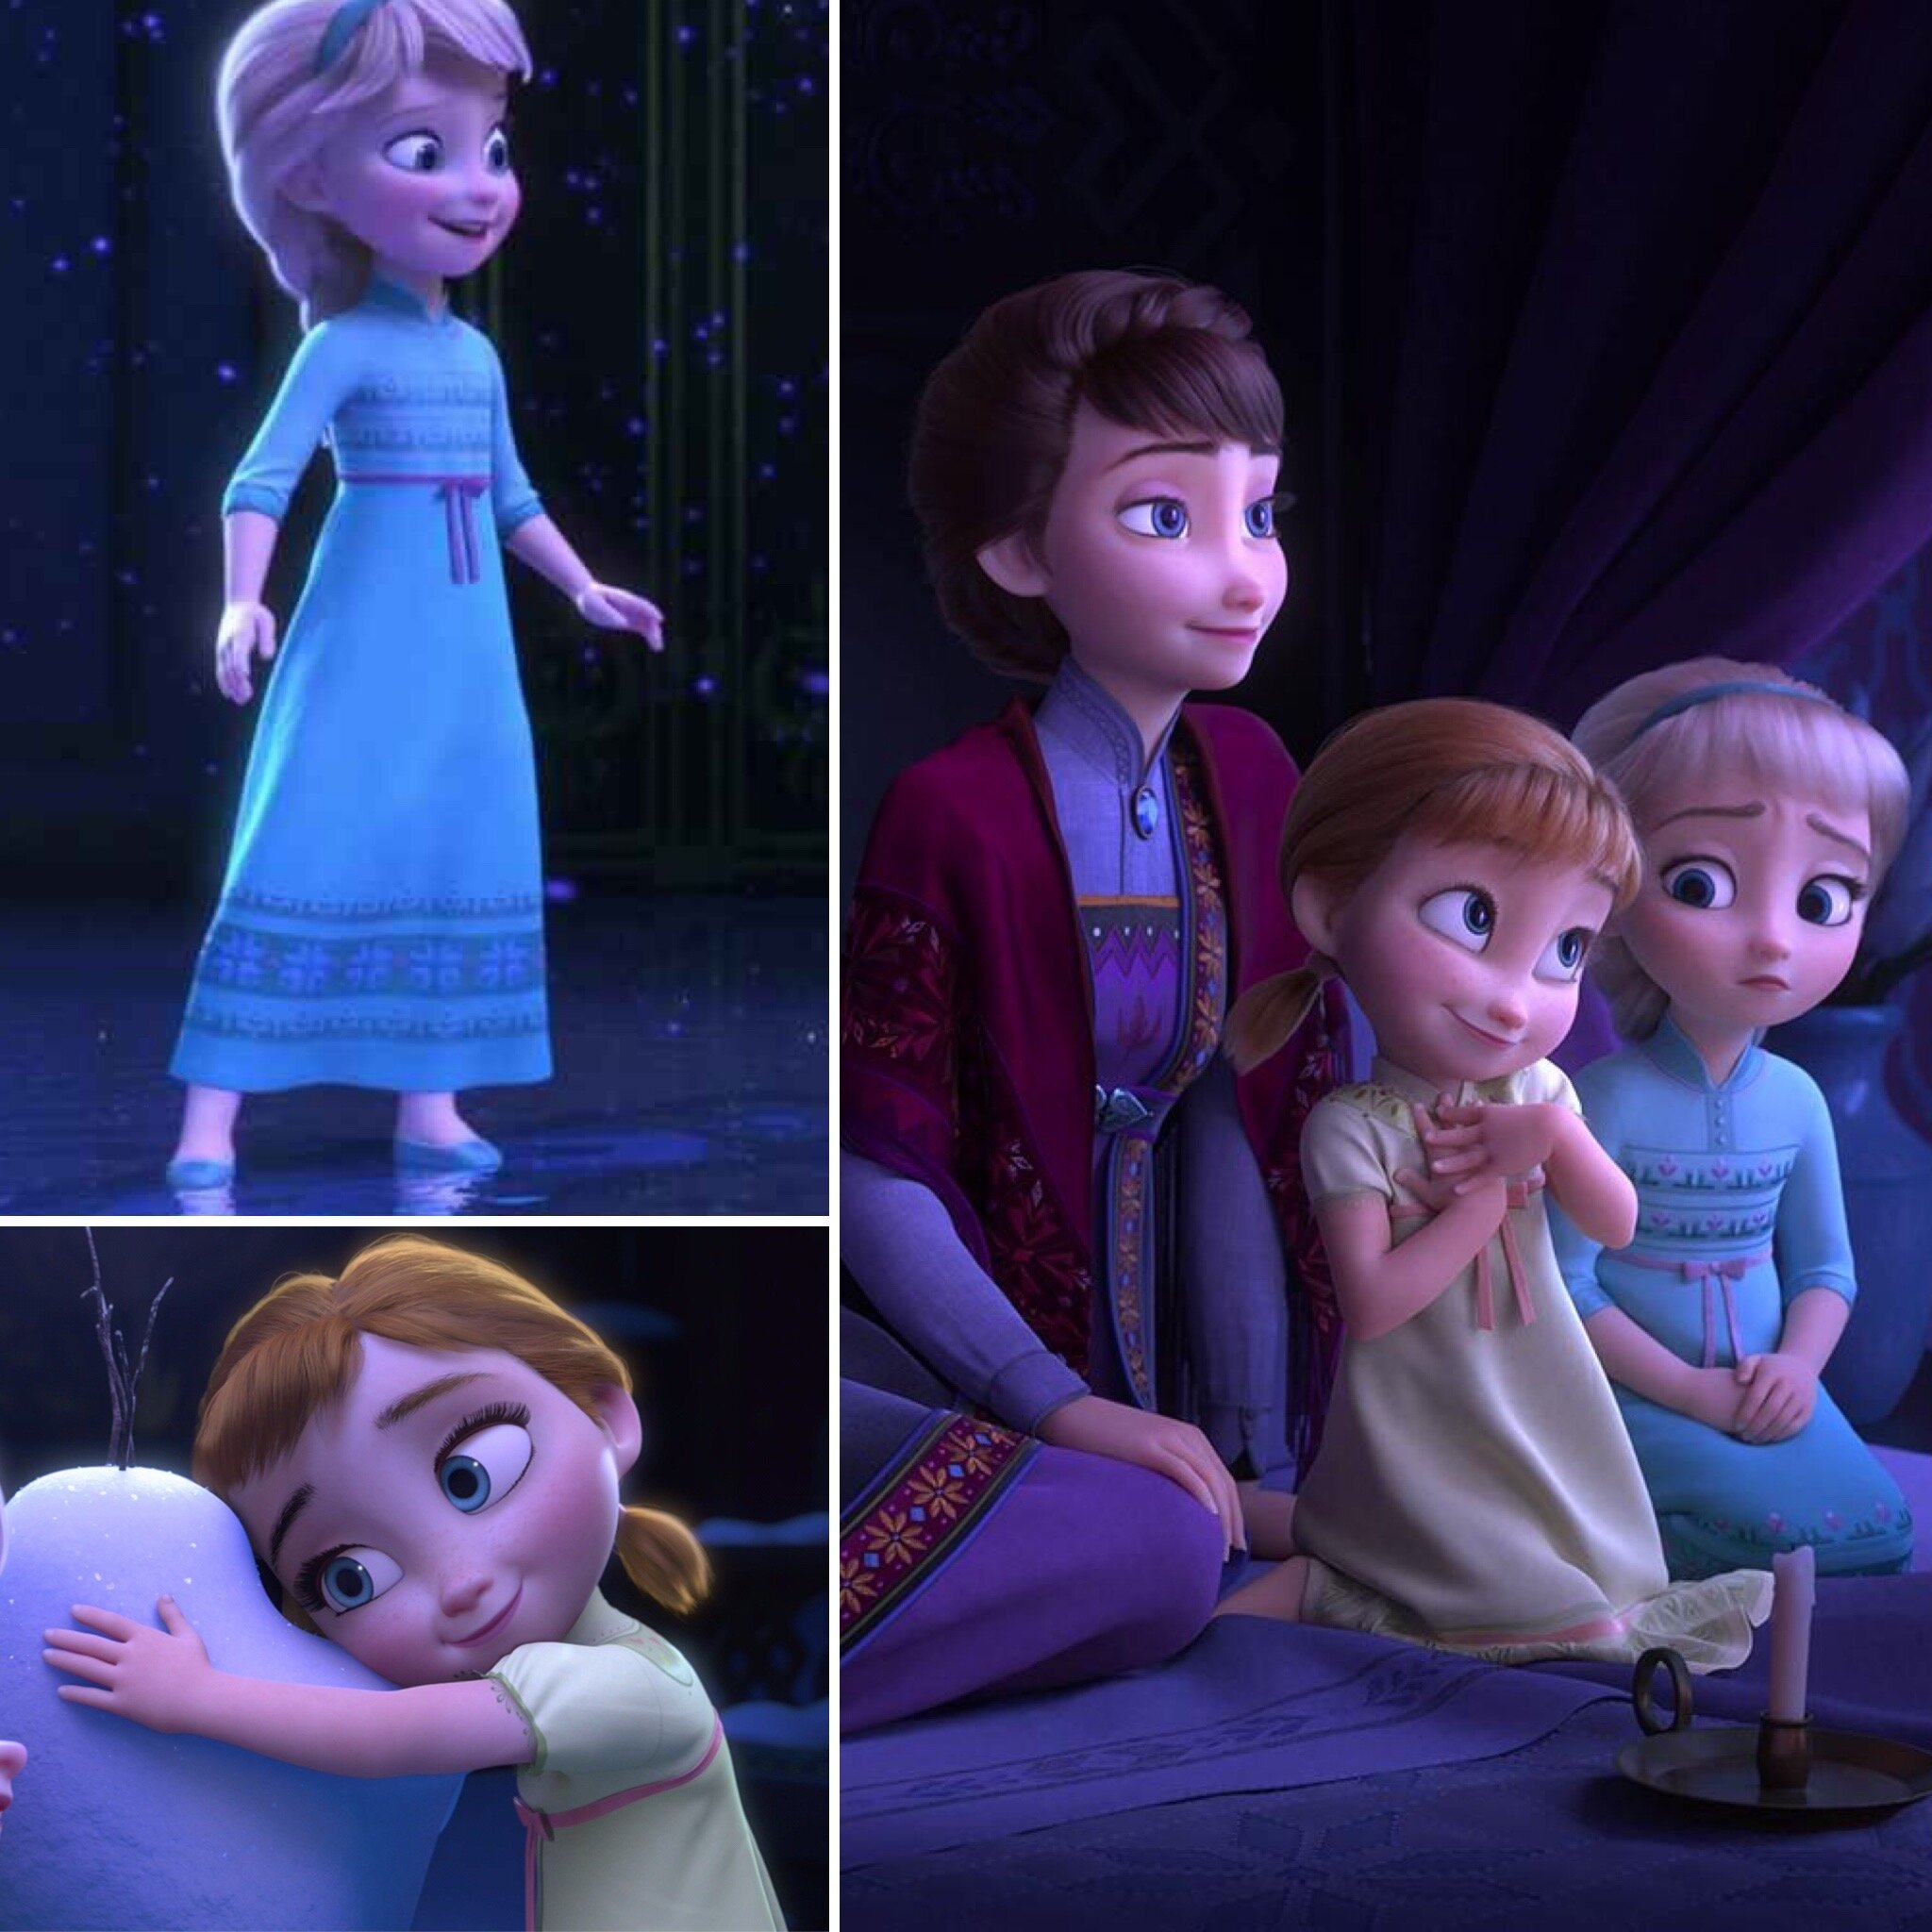 Anna's Frozen 2 journey is a deeply healing moment for codependents